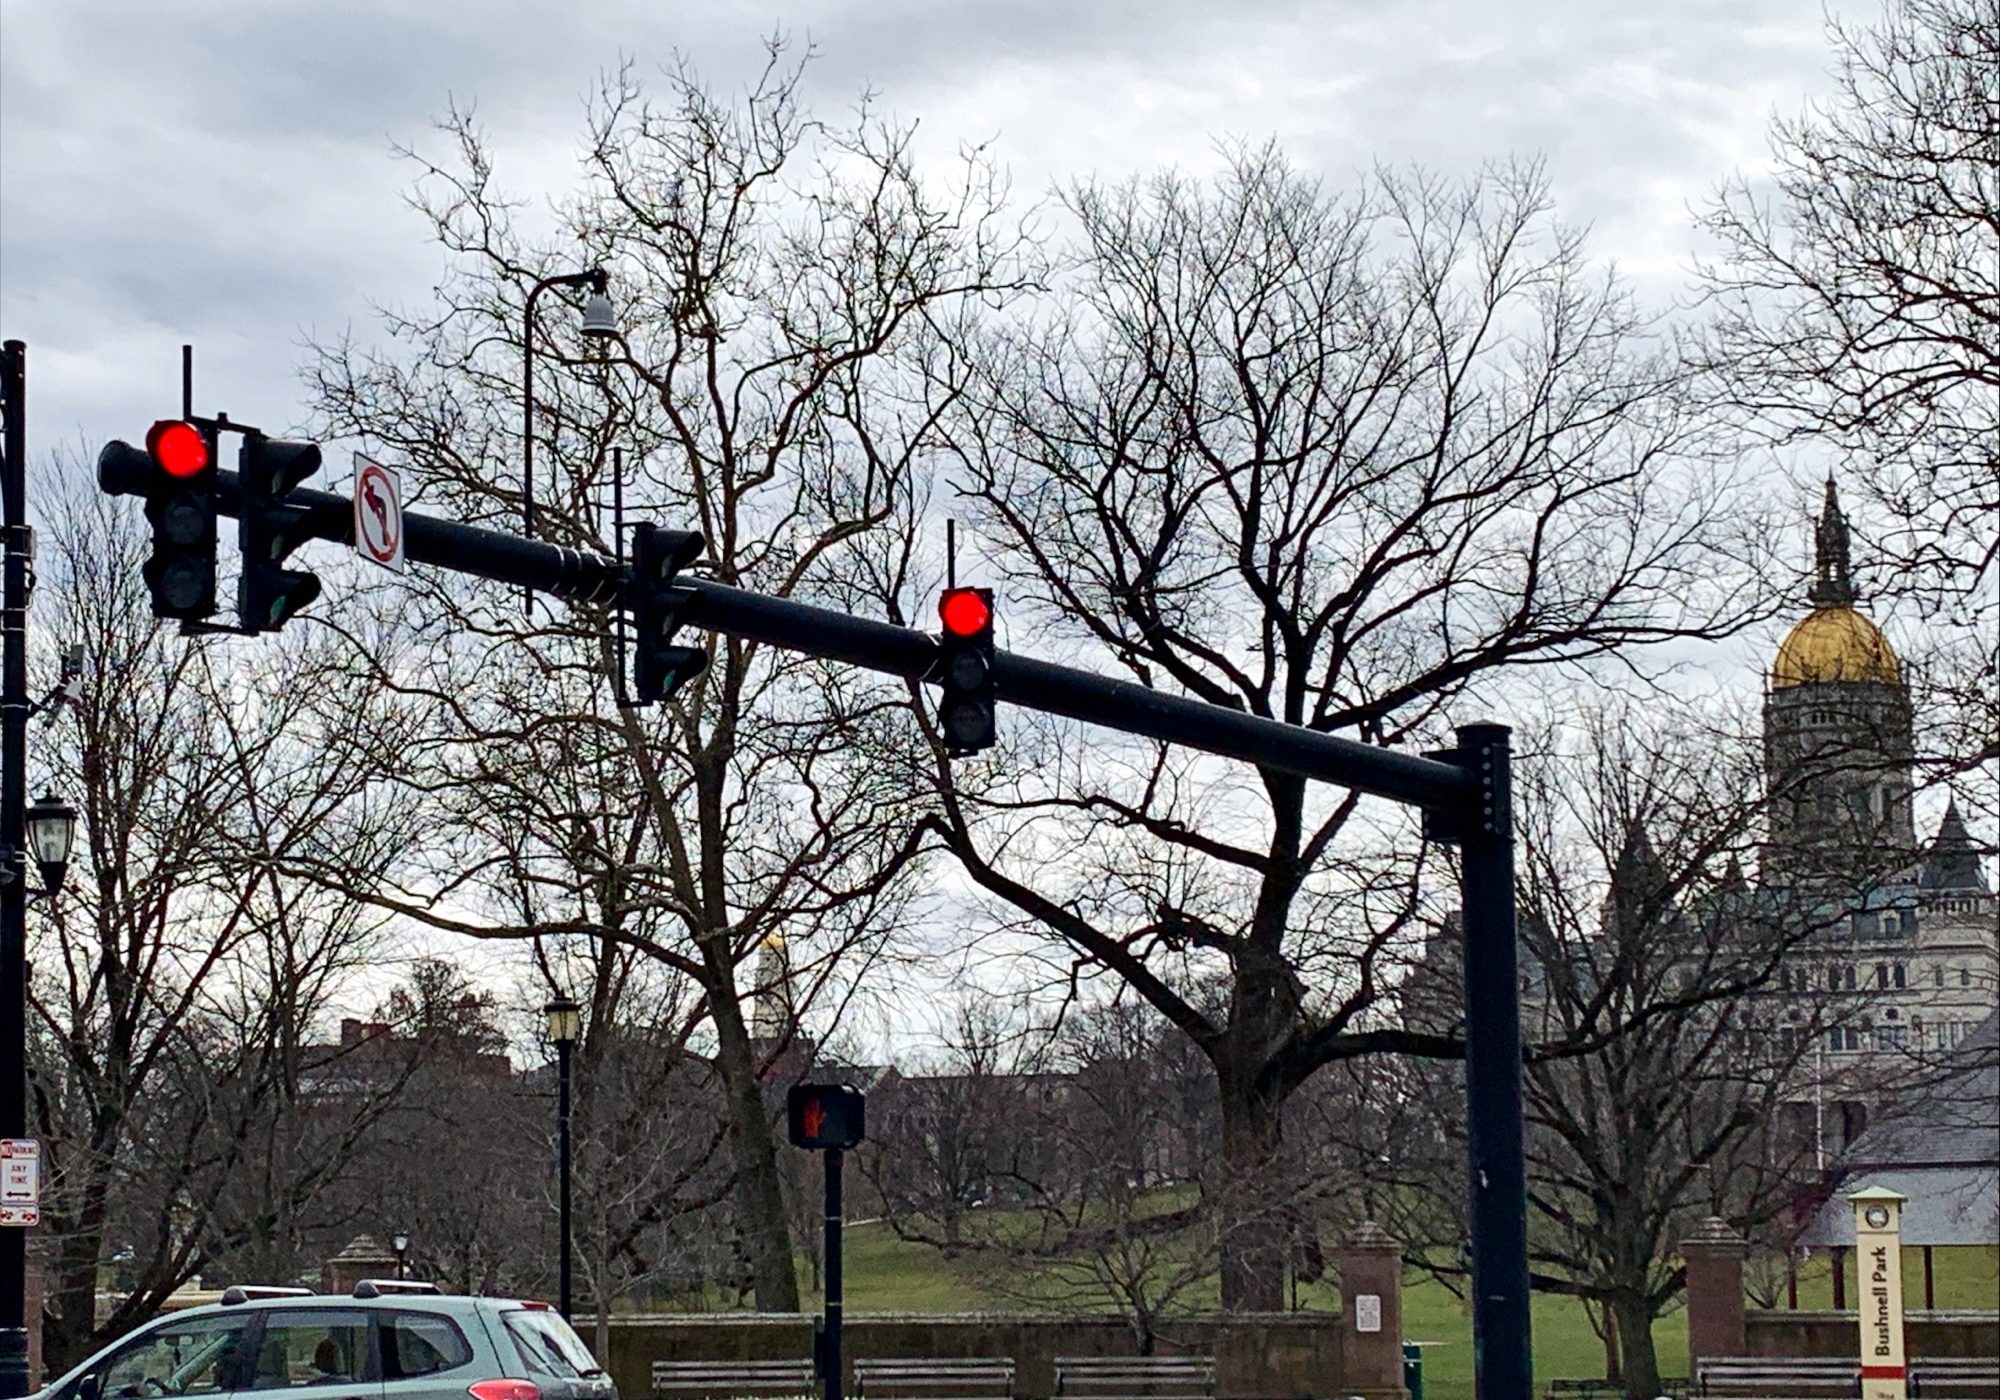 Traffic signal showing red light